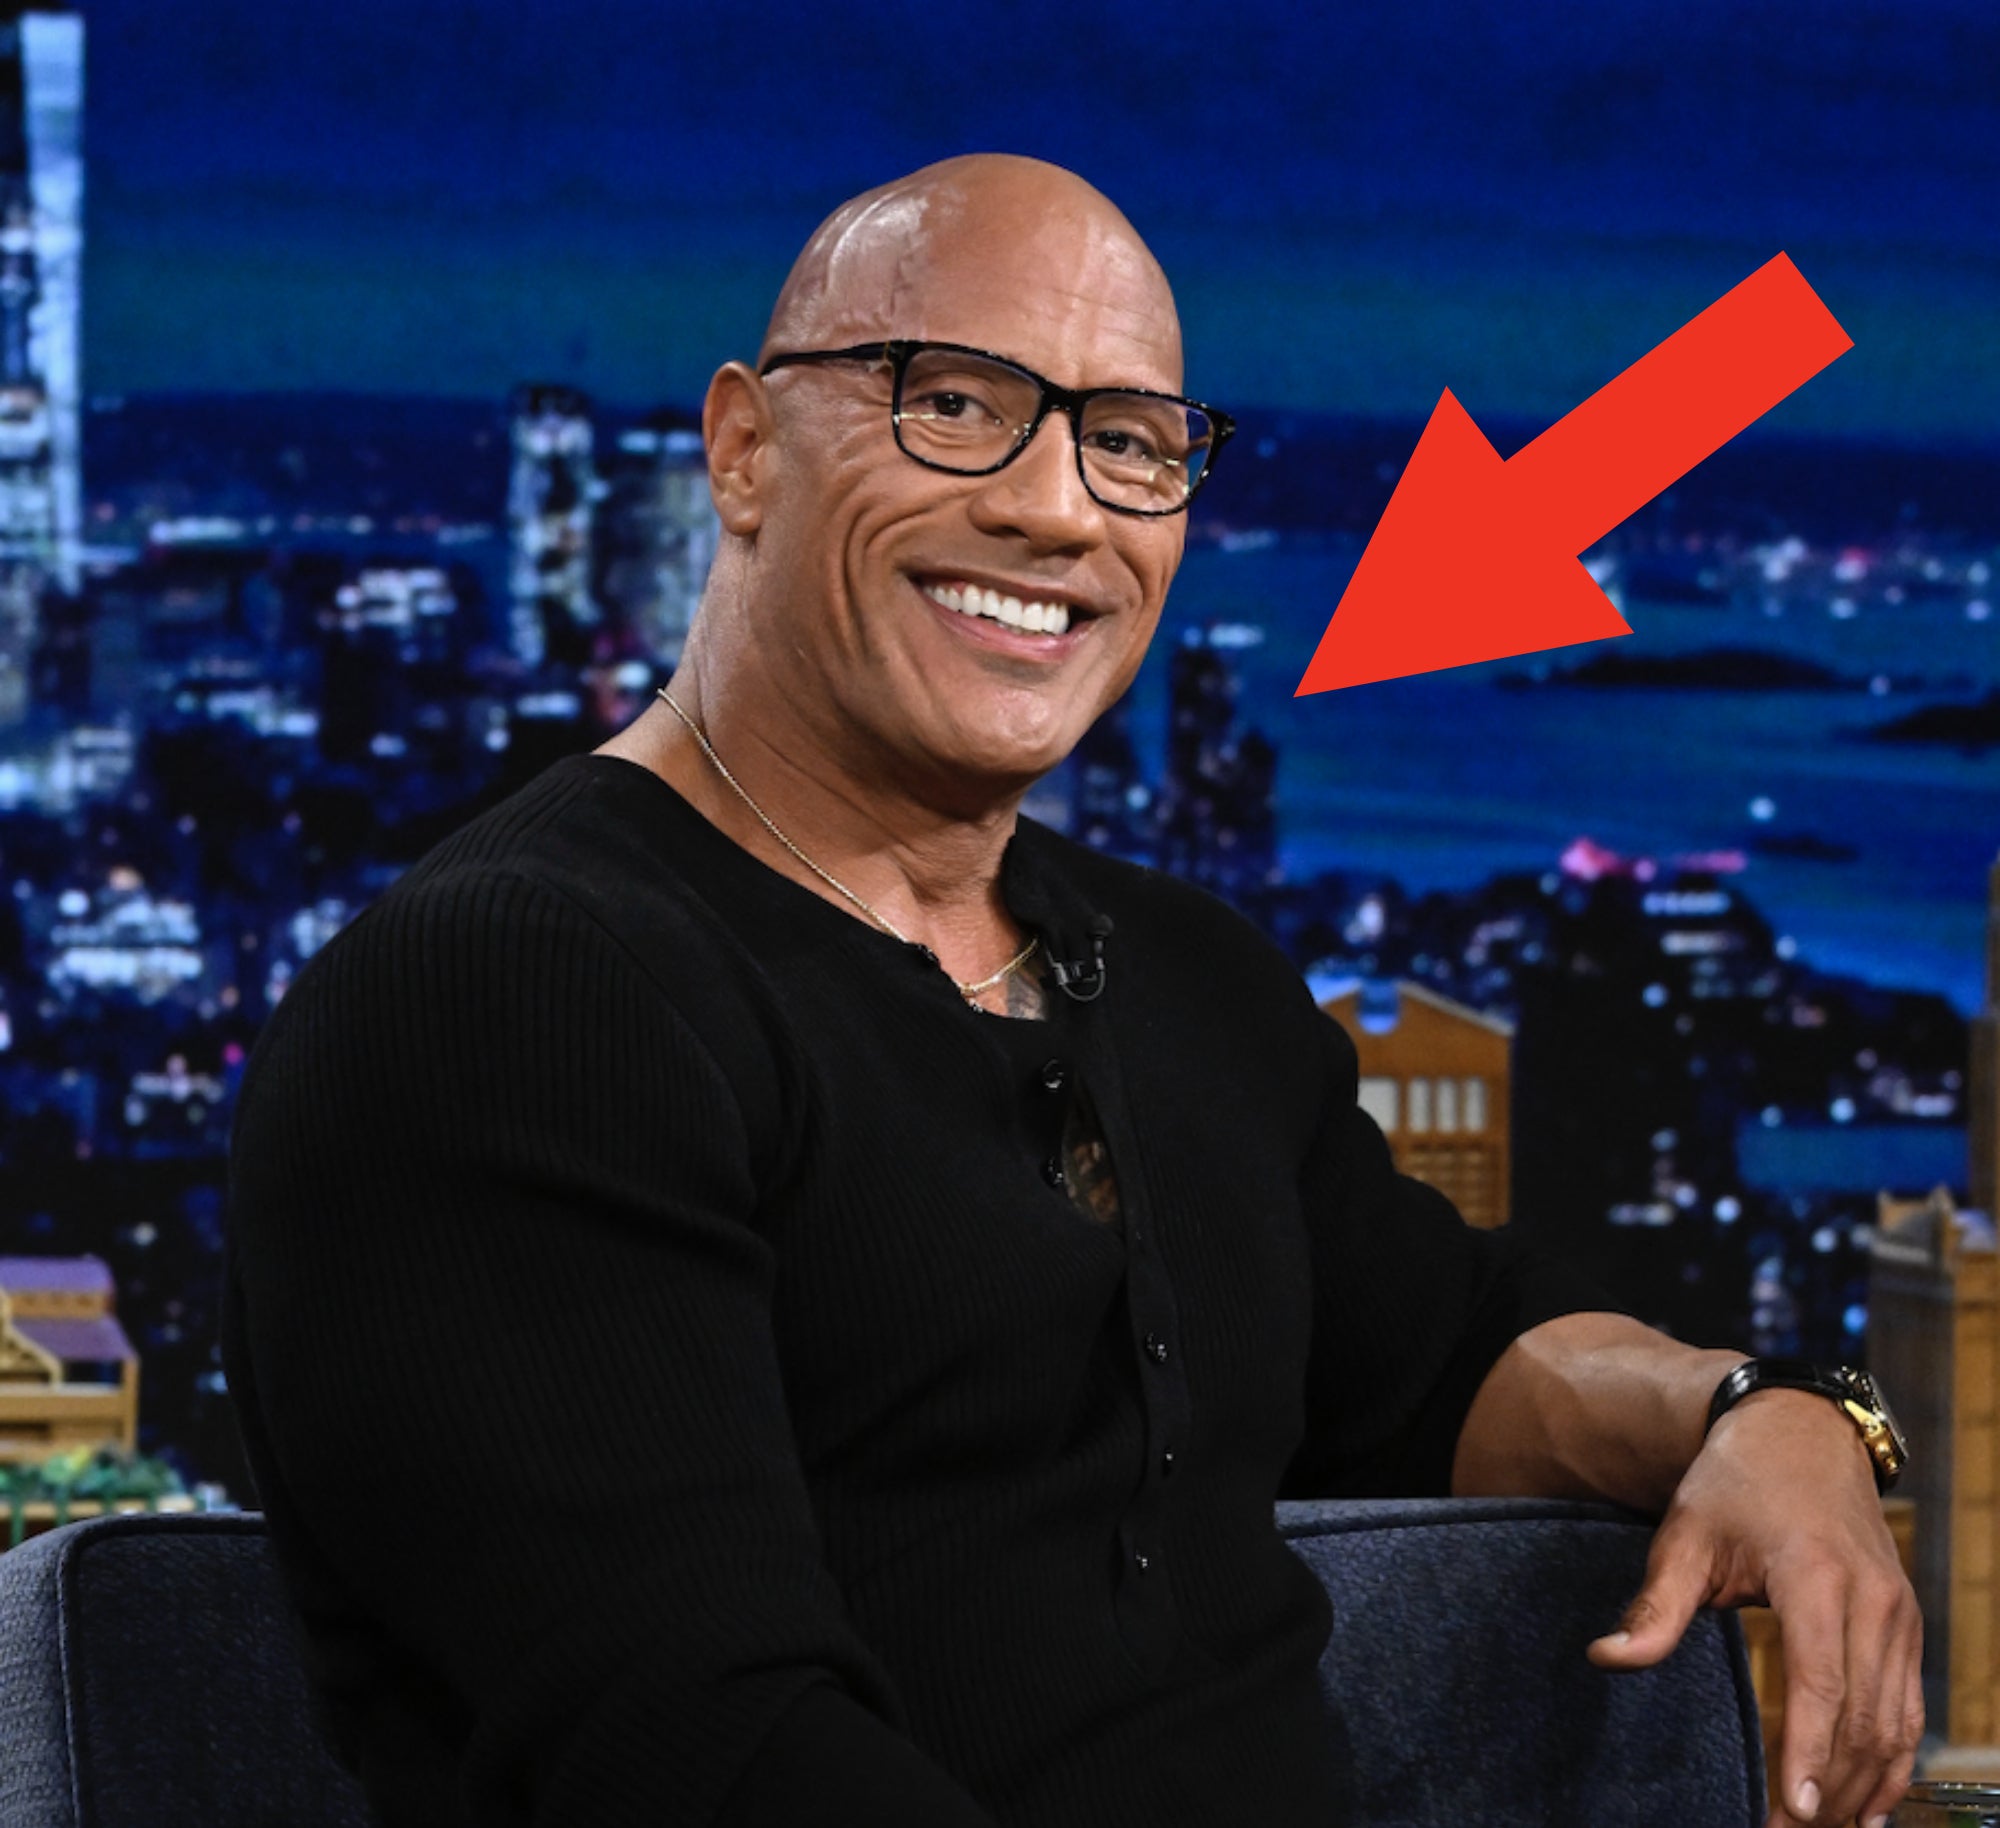 Dwayne Johnson seated on a talk show set, smiling, in a black outfit with wrist accessories